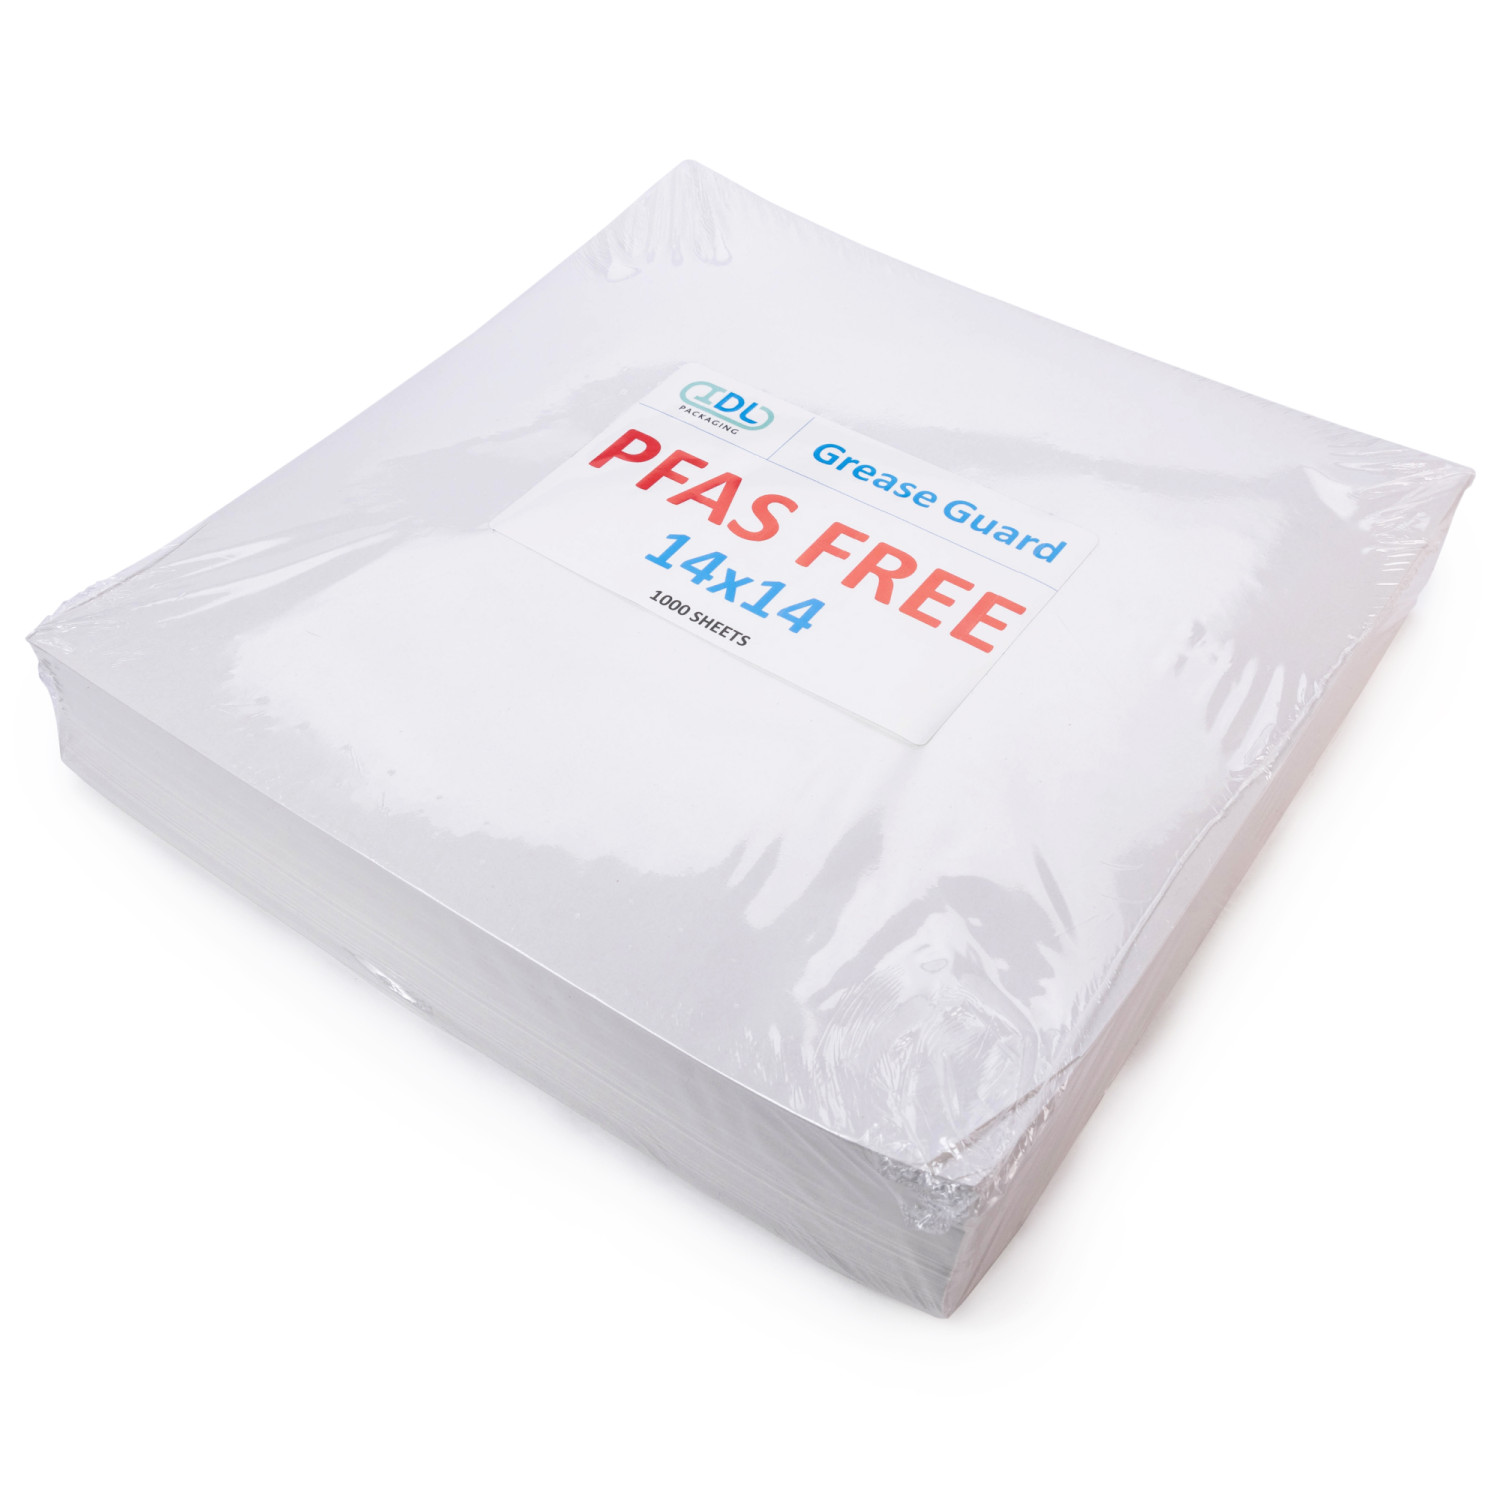 14 x 14 PFAS-Free, Grease-Proof Paper Sheets, White buy in stock